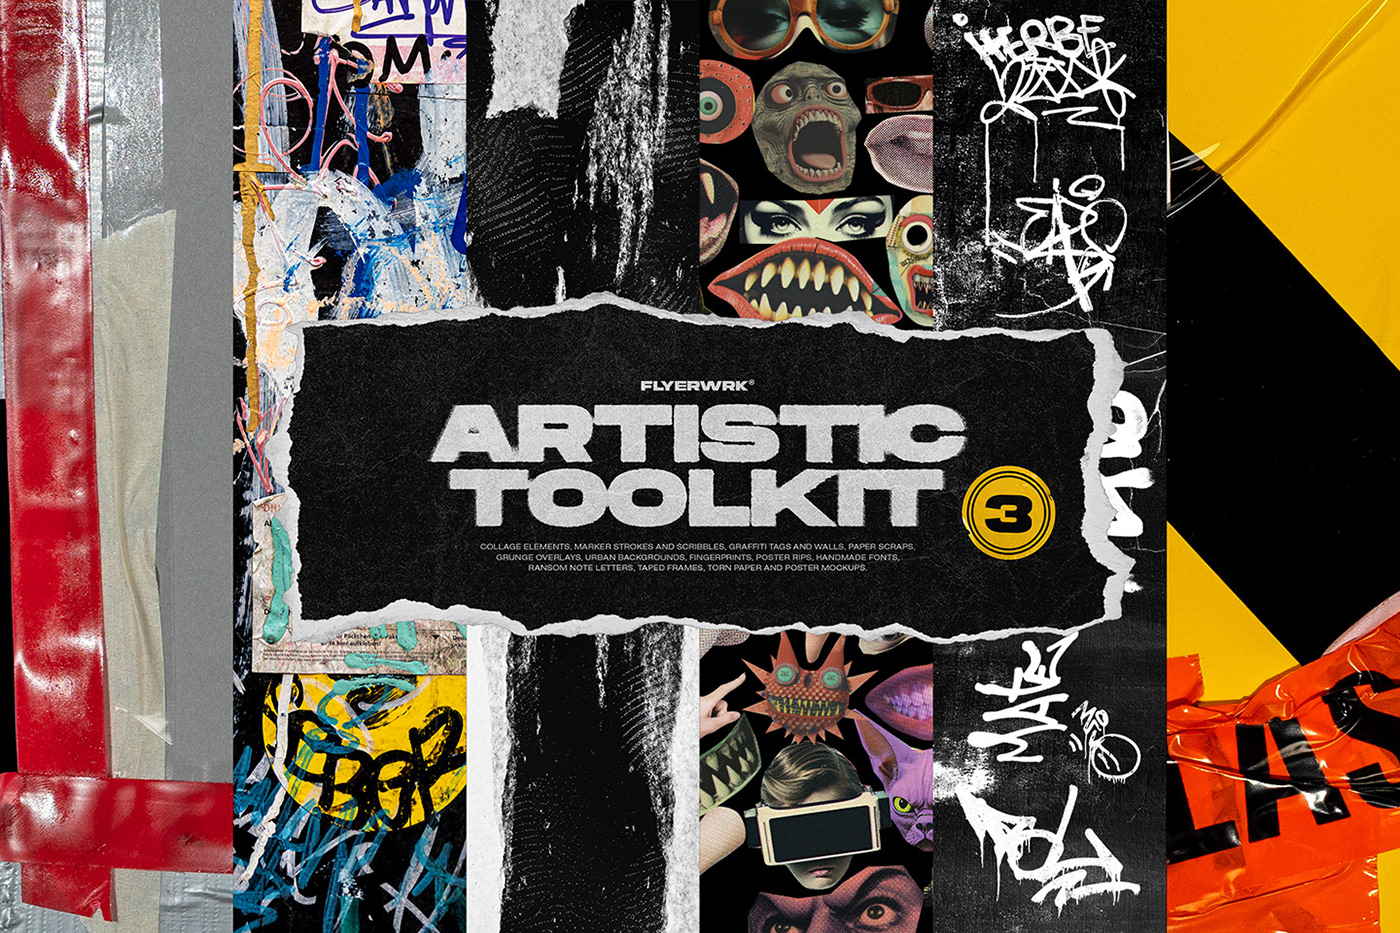 anti design graphics objects texture Graffiti collage backgrounds grunge scribble fonts